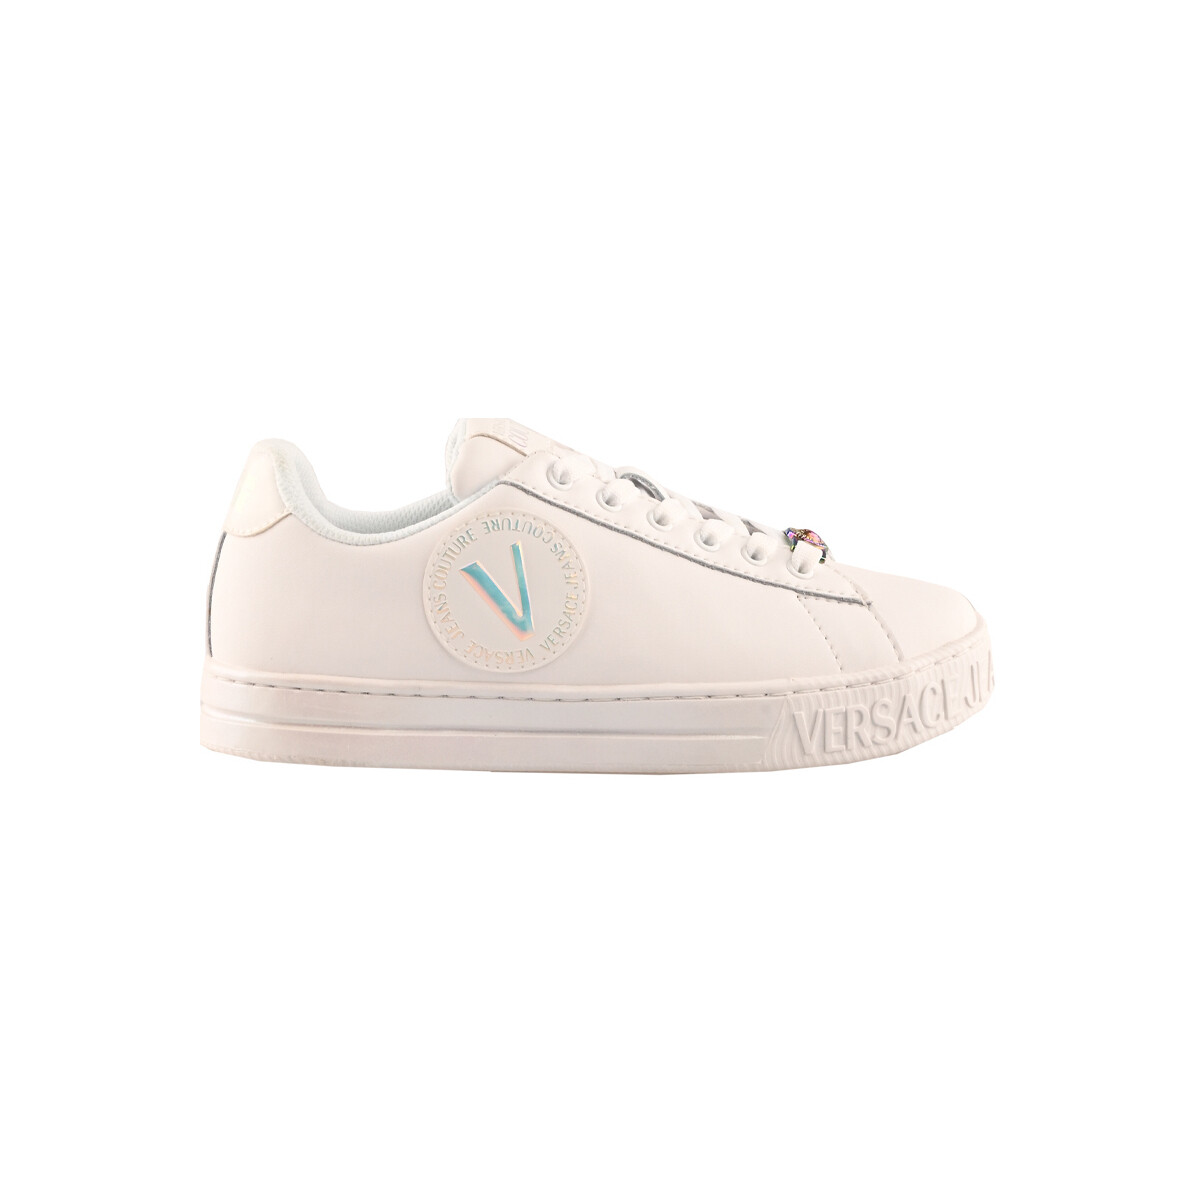 Chaussures Femme Baskets basses Versace Jeans Couture 74va3sk3zp235-md7 Blanc